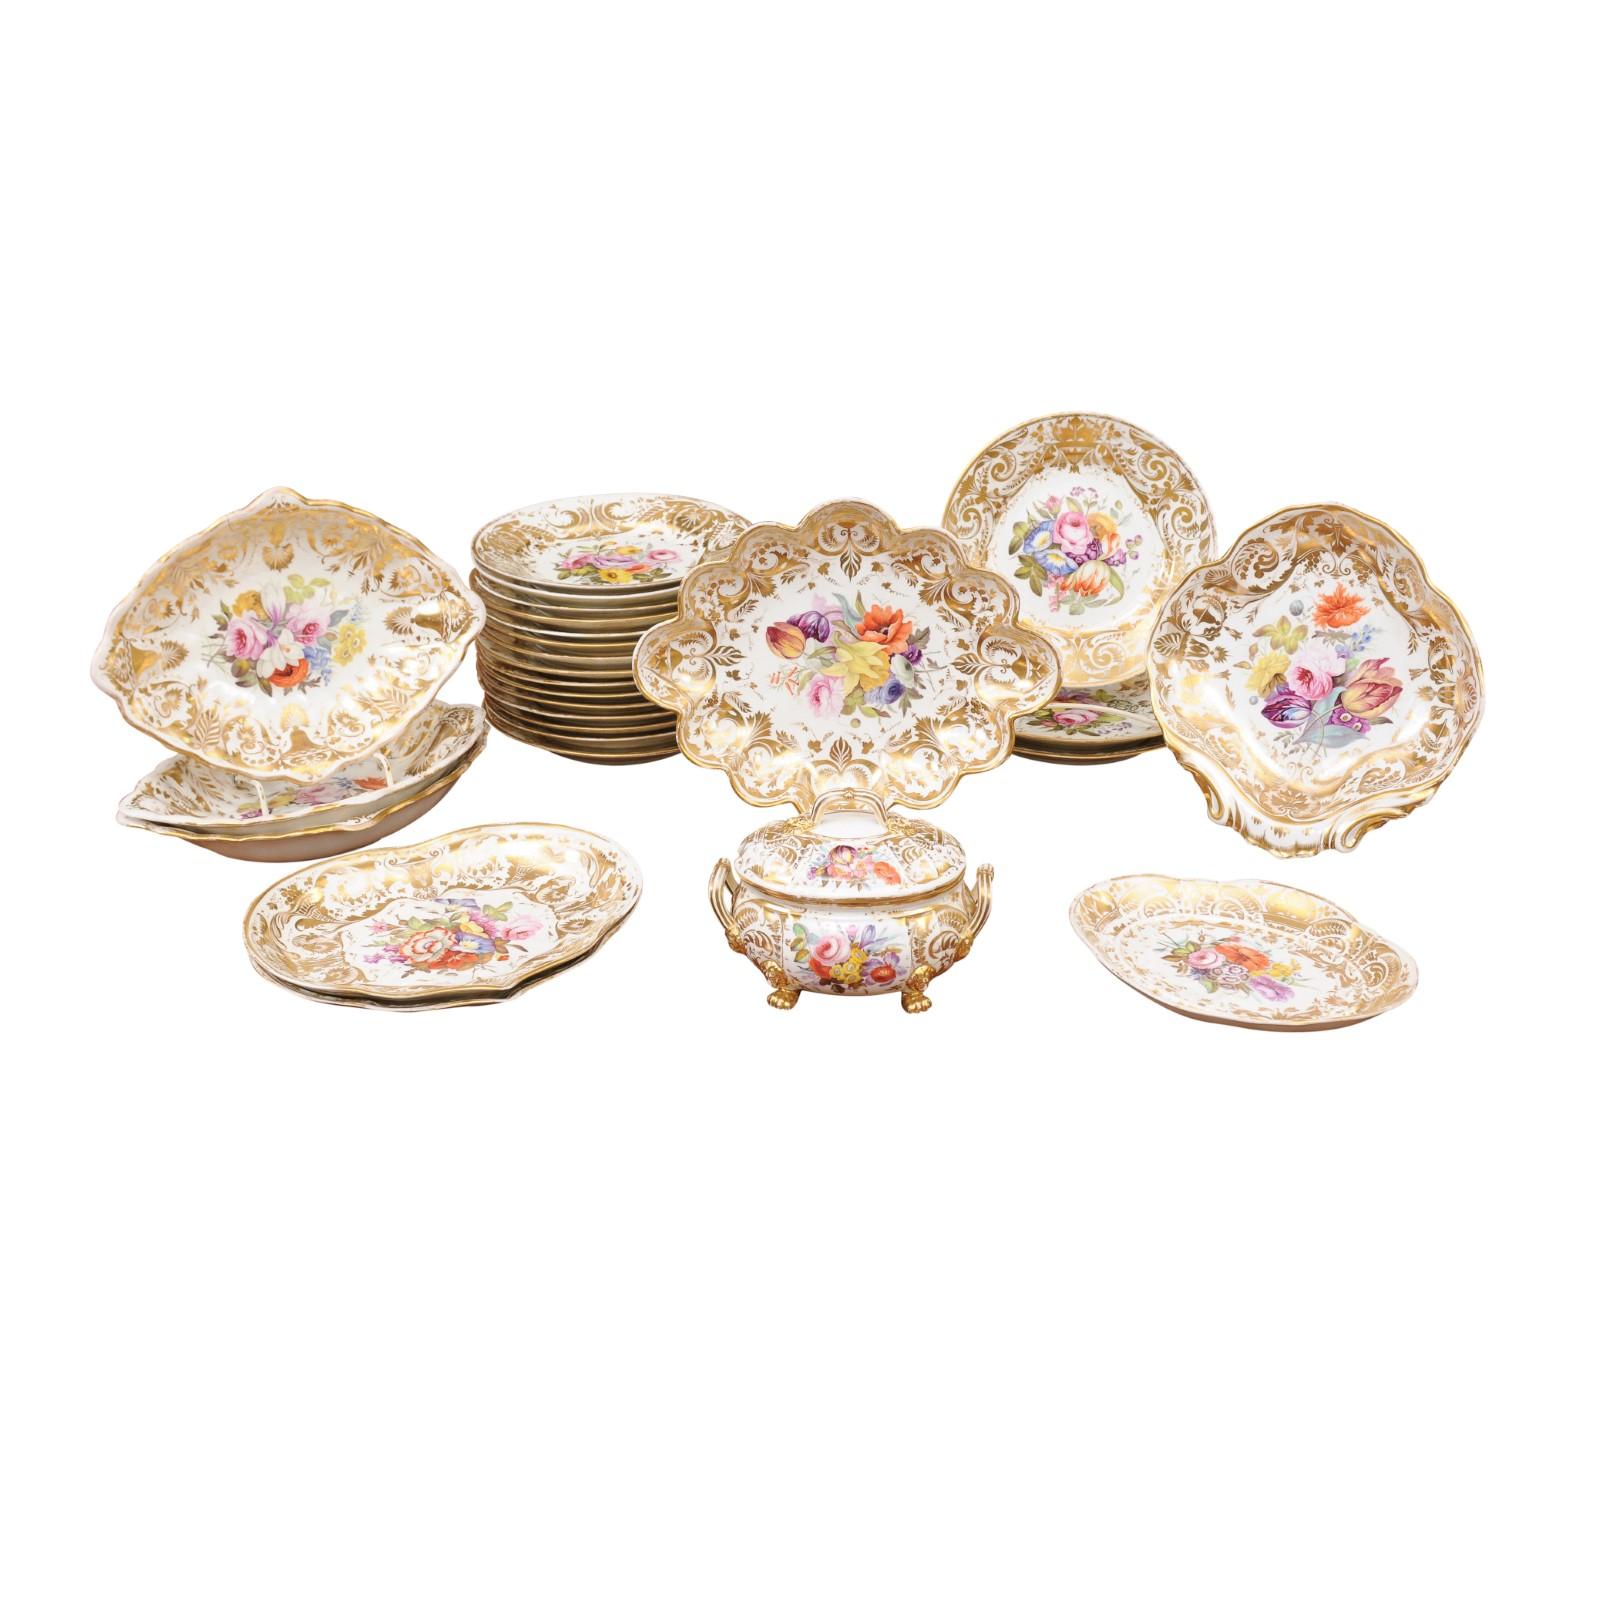 Set of Early 19th Century English Derby Porcelain Dessert Service For Sale 13